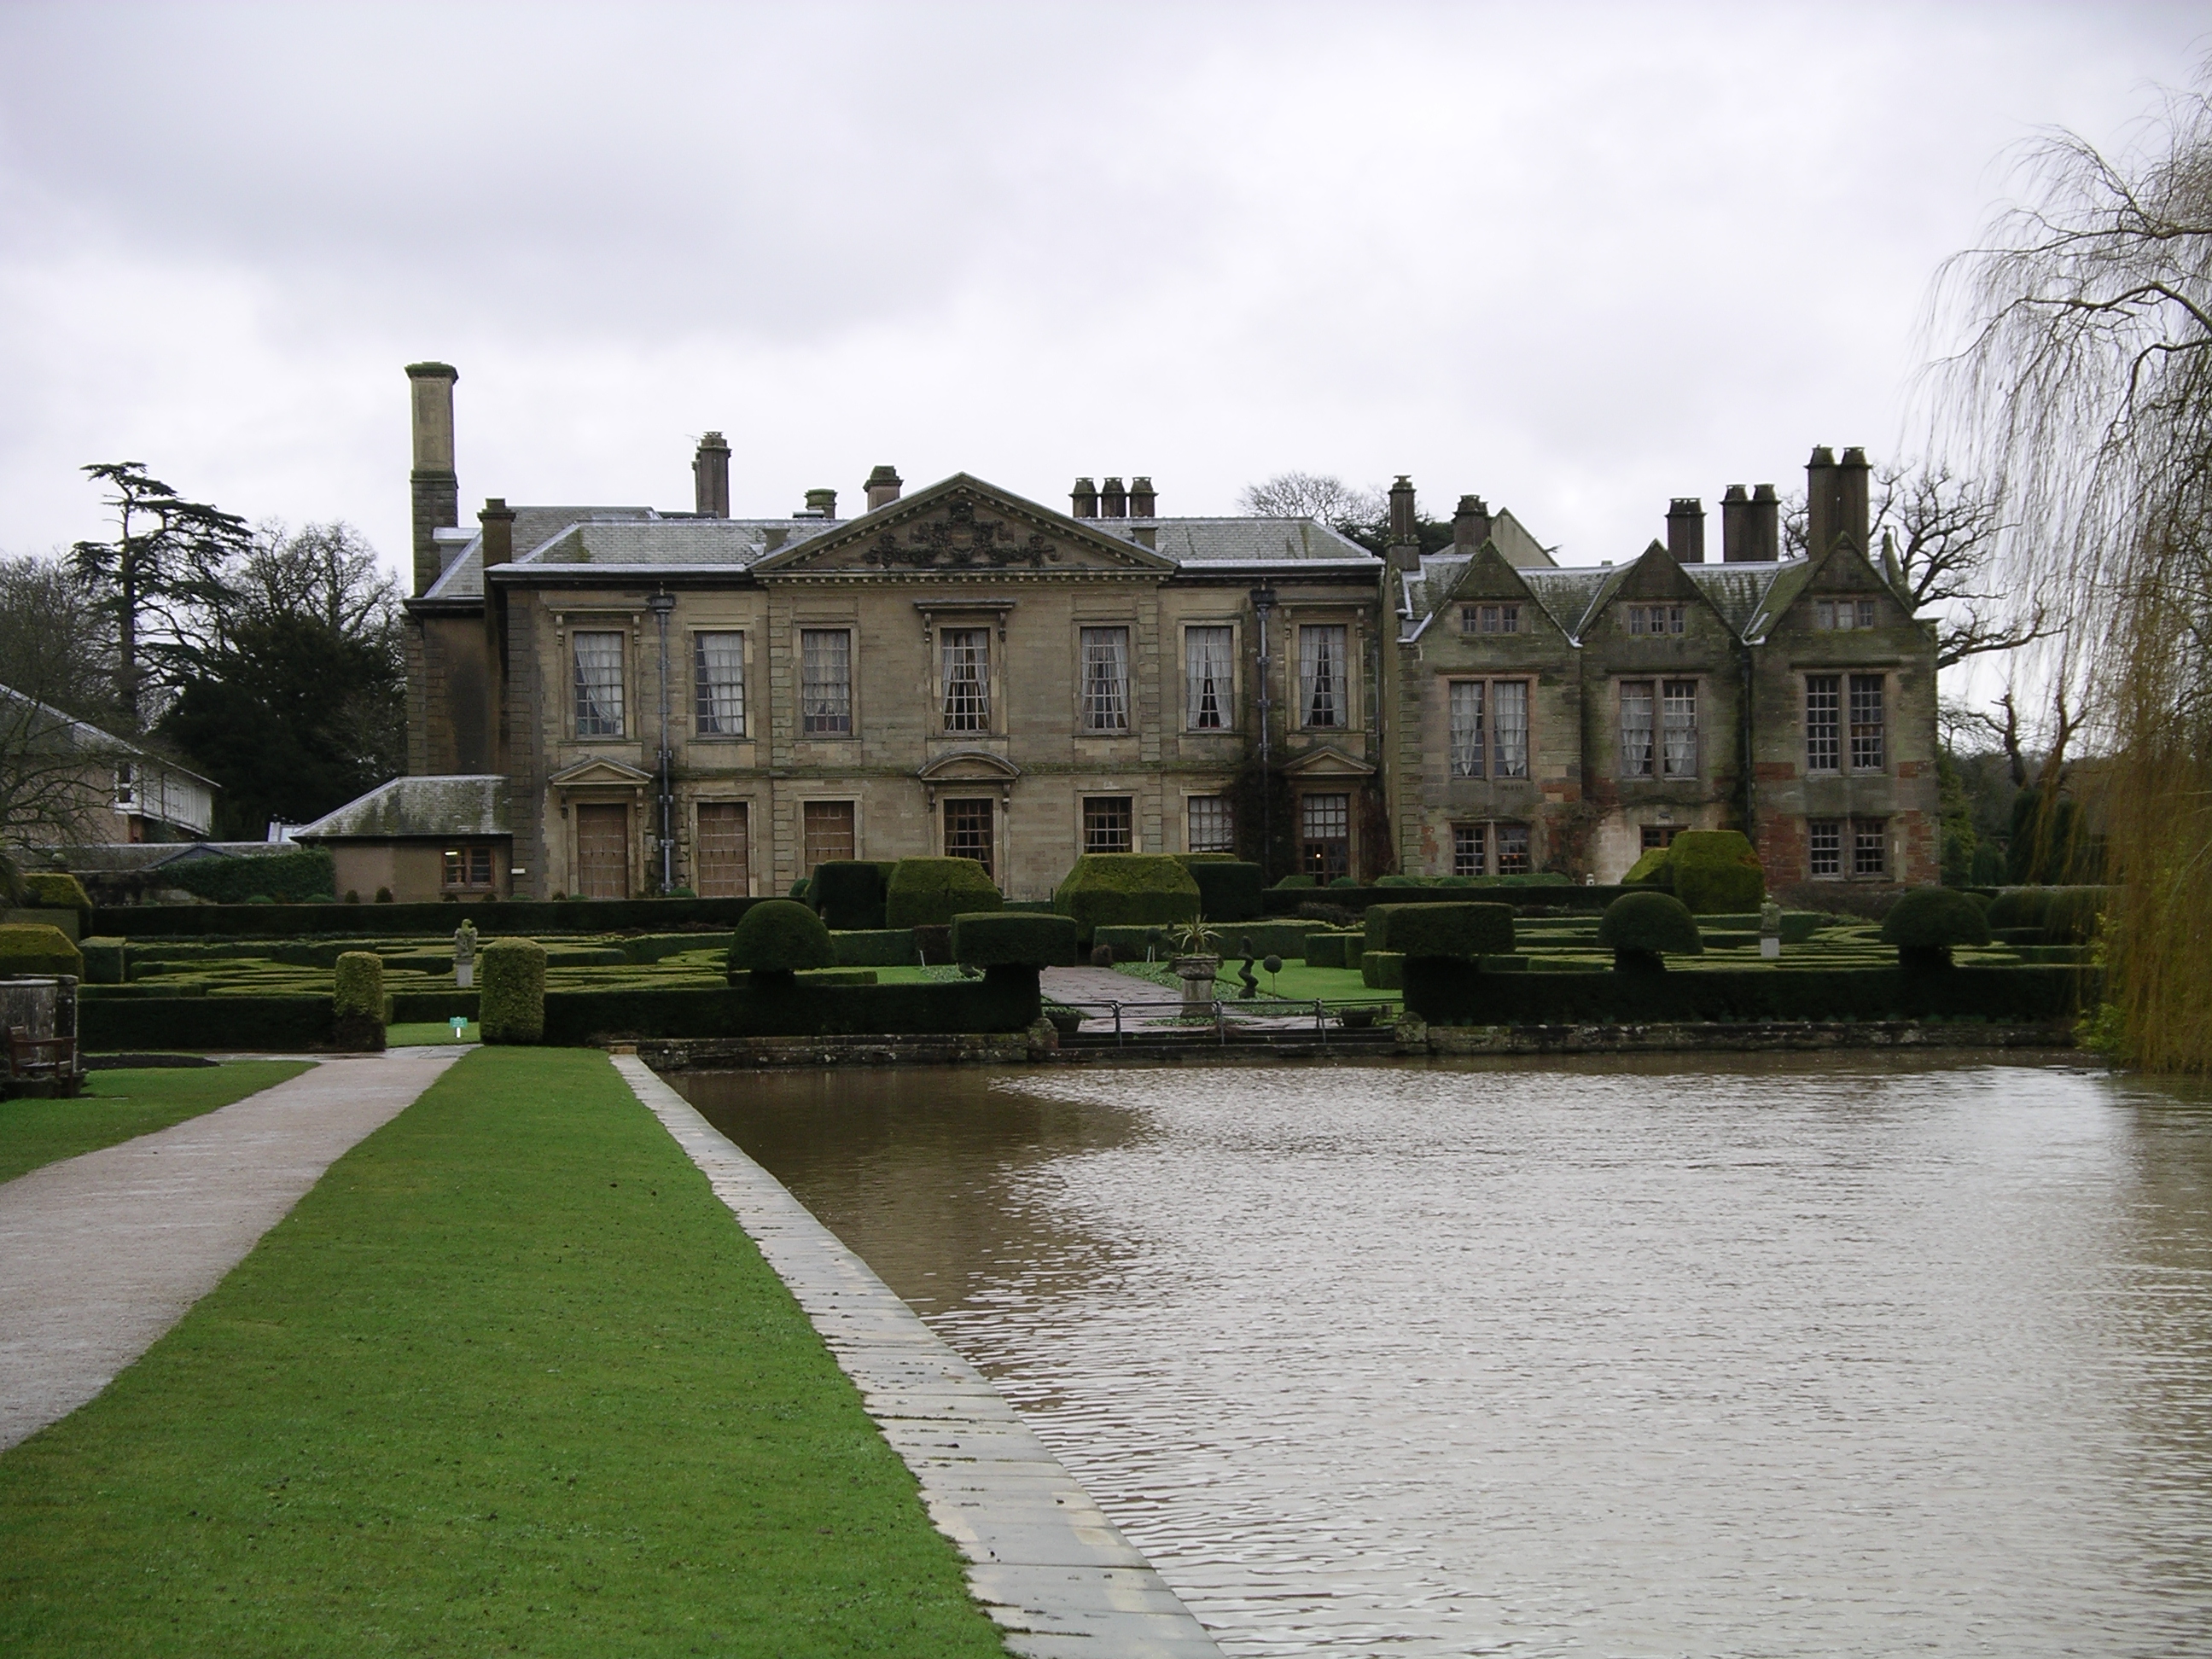 Coombe_abbey_-_west_wing_and_gardens_18j08.JPG